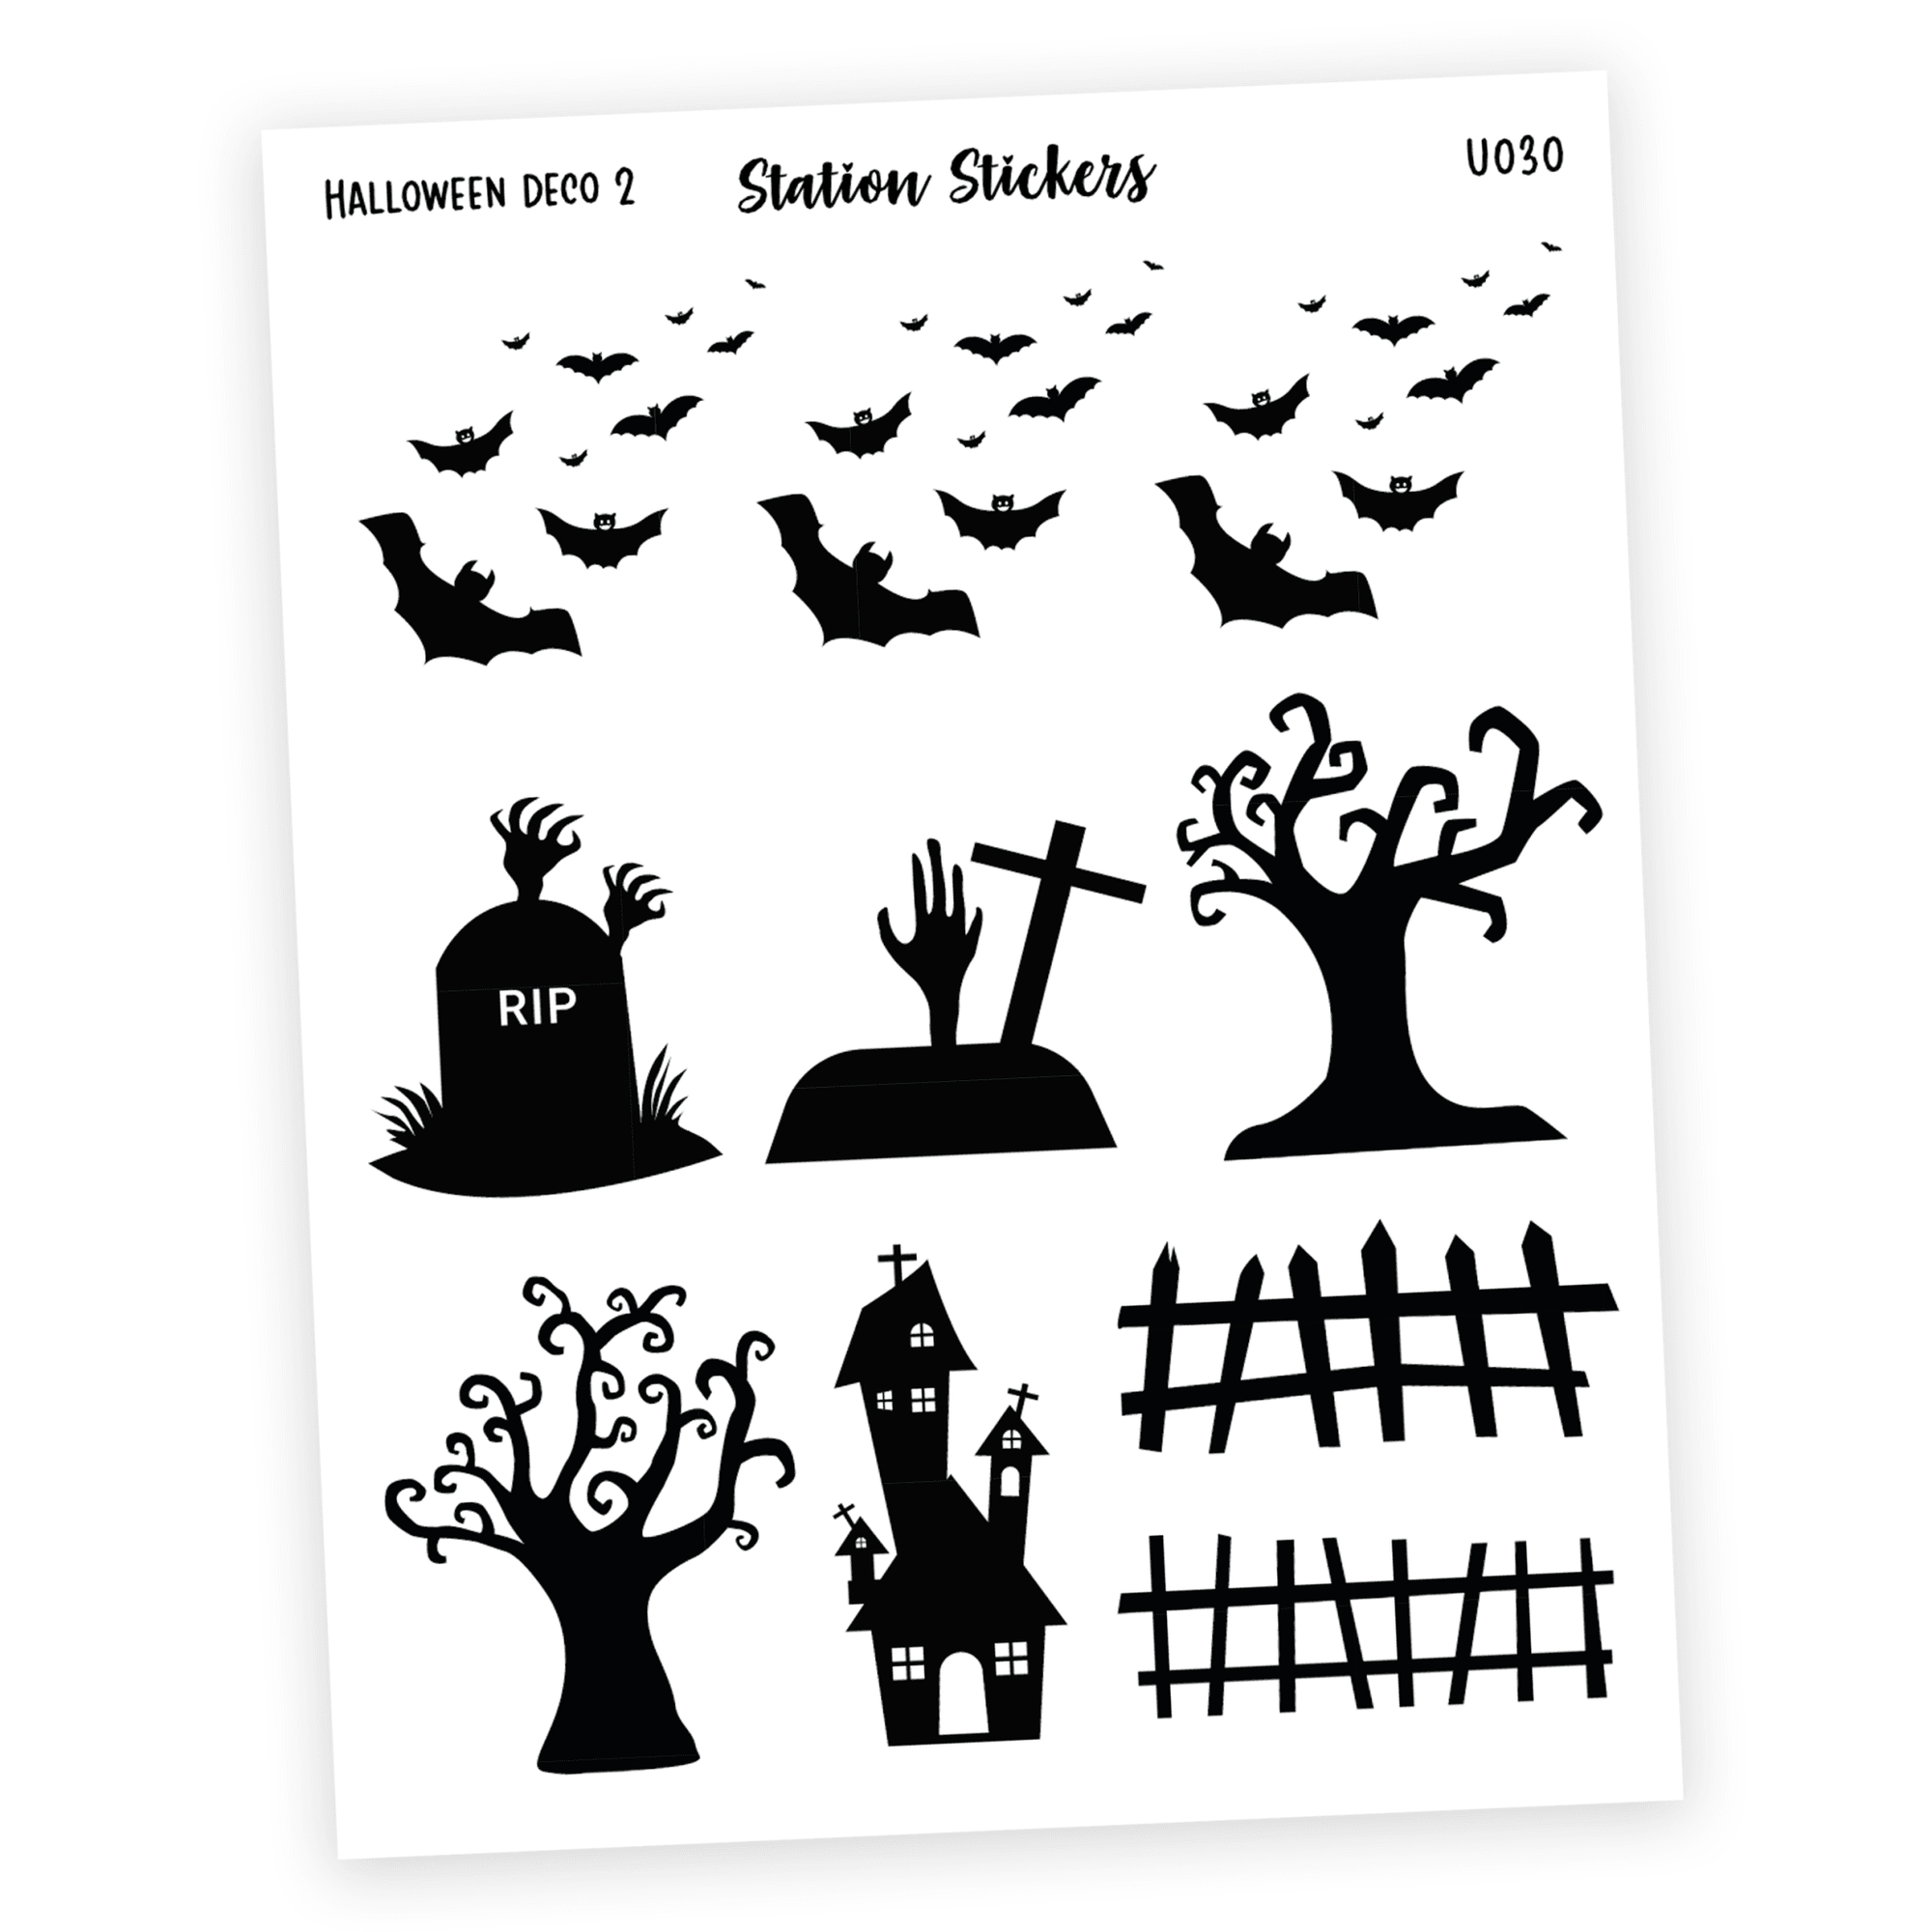 DECO • HALLOWEEN 2 [COMING 8/7] - Station Stickers